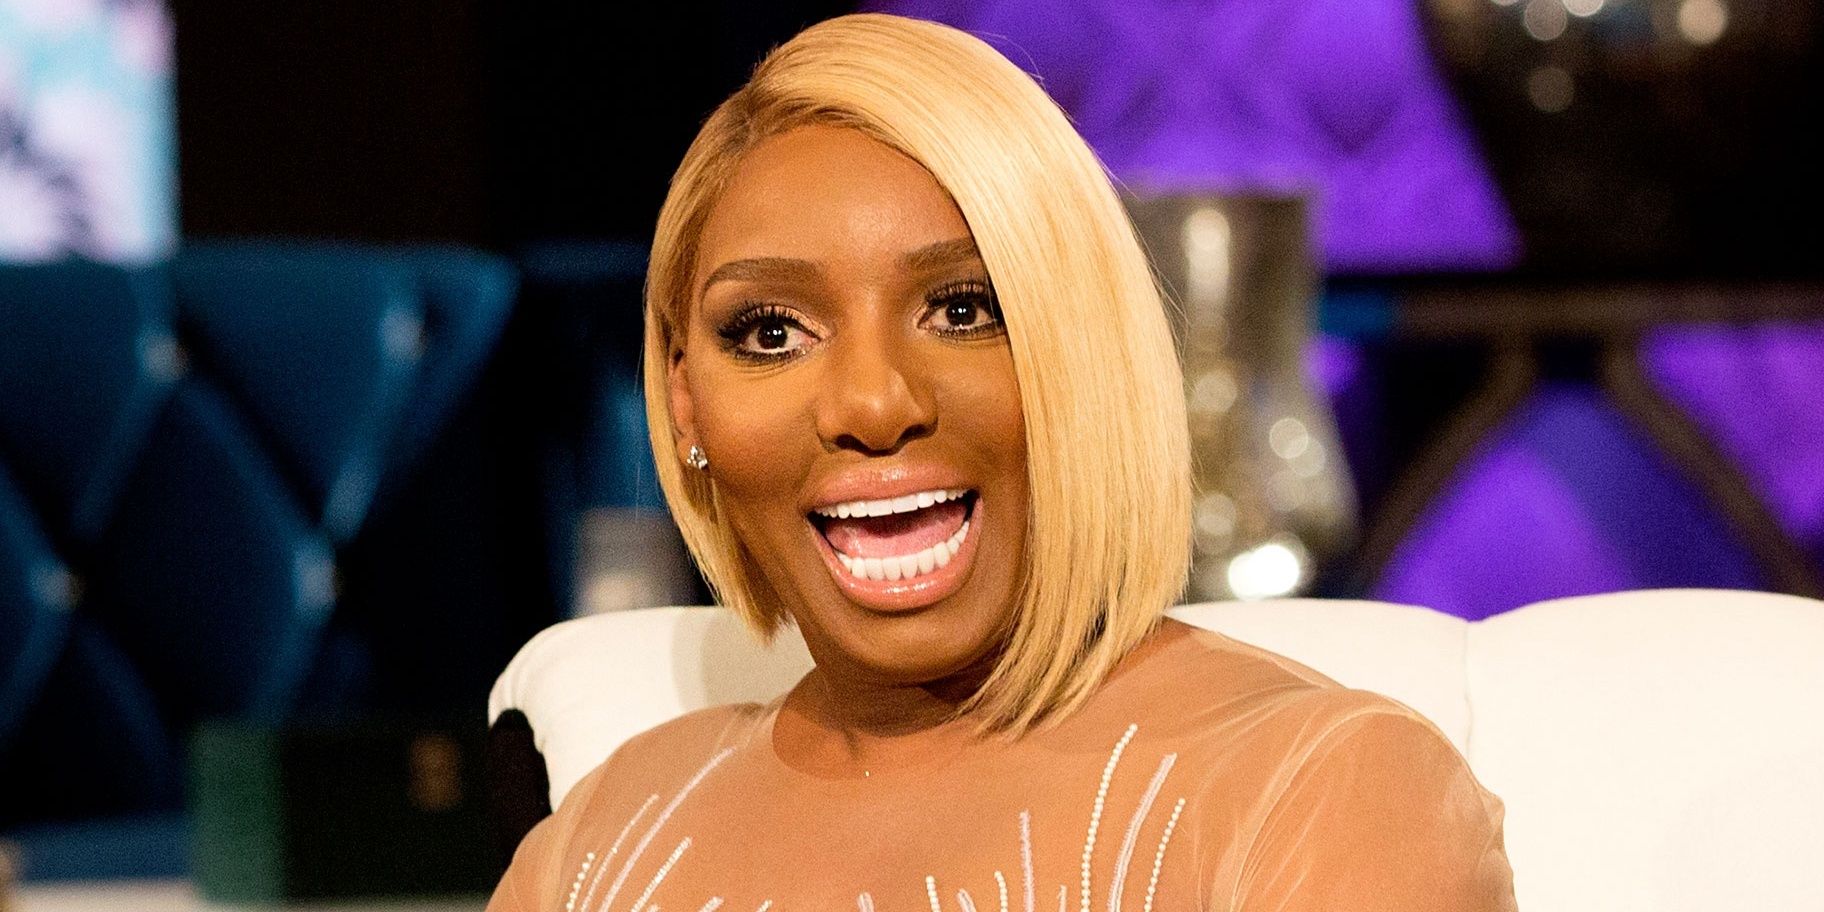 NeNe Leaks talking to someone on The Real Housewives of Atlanta